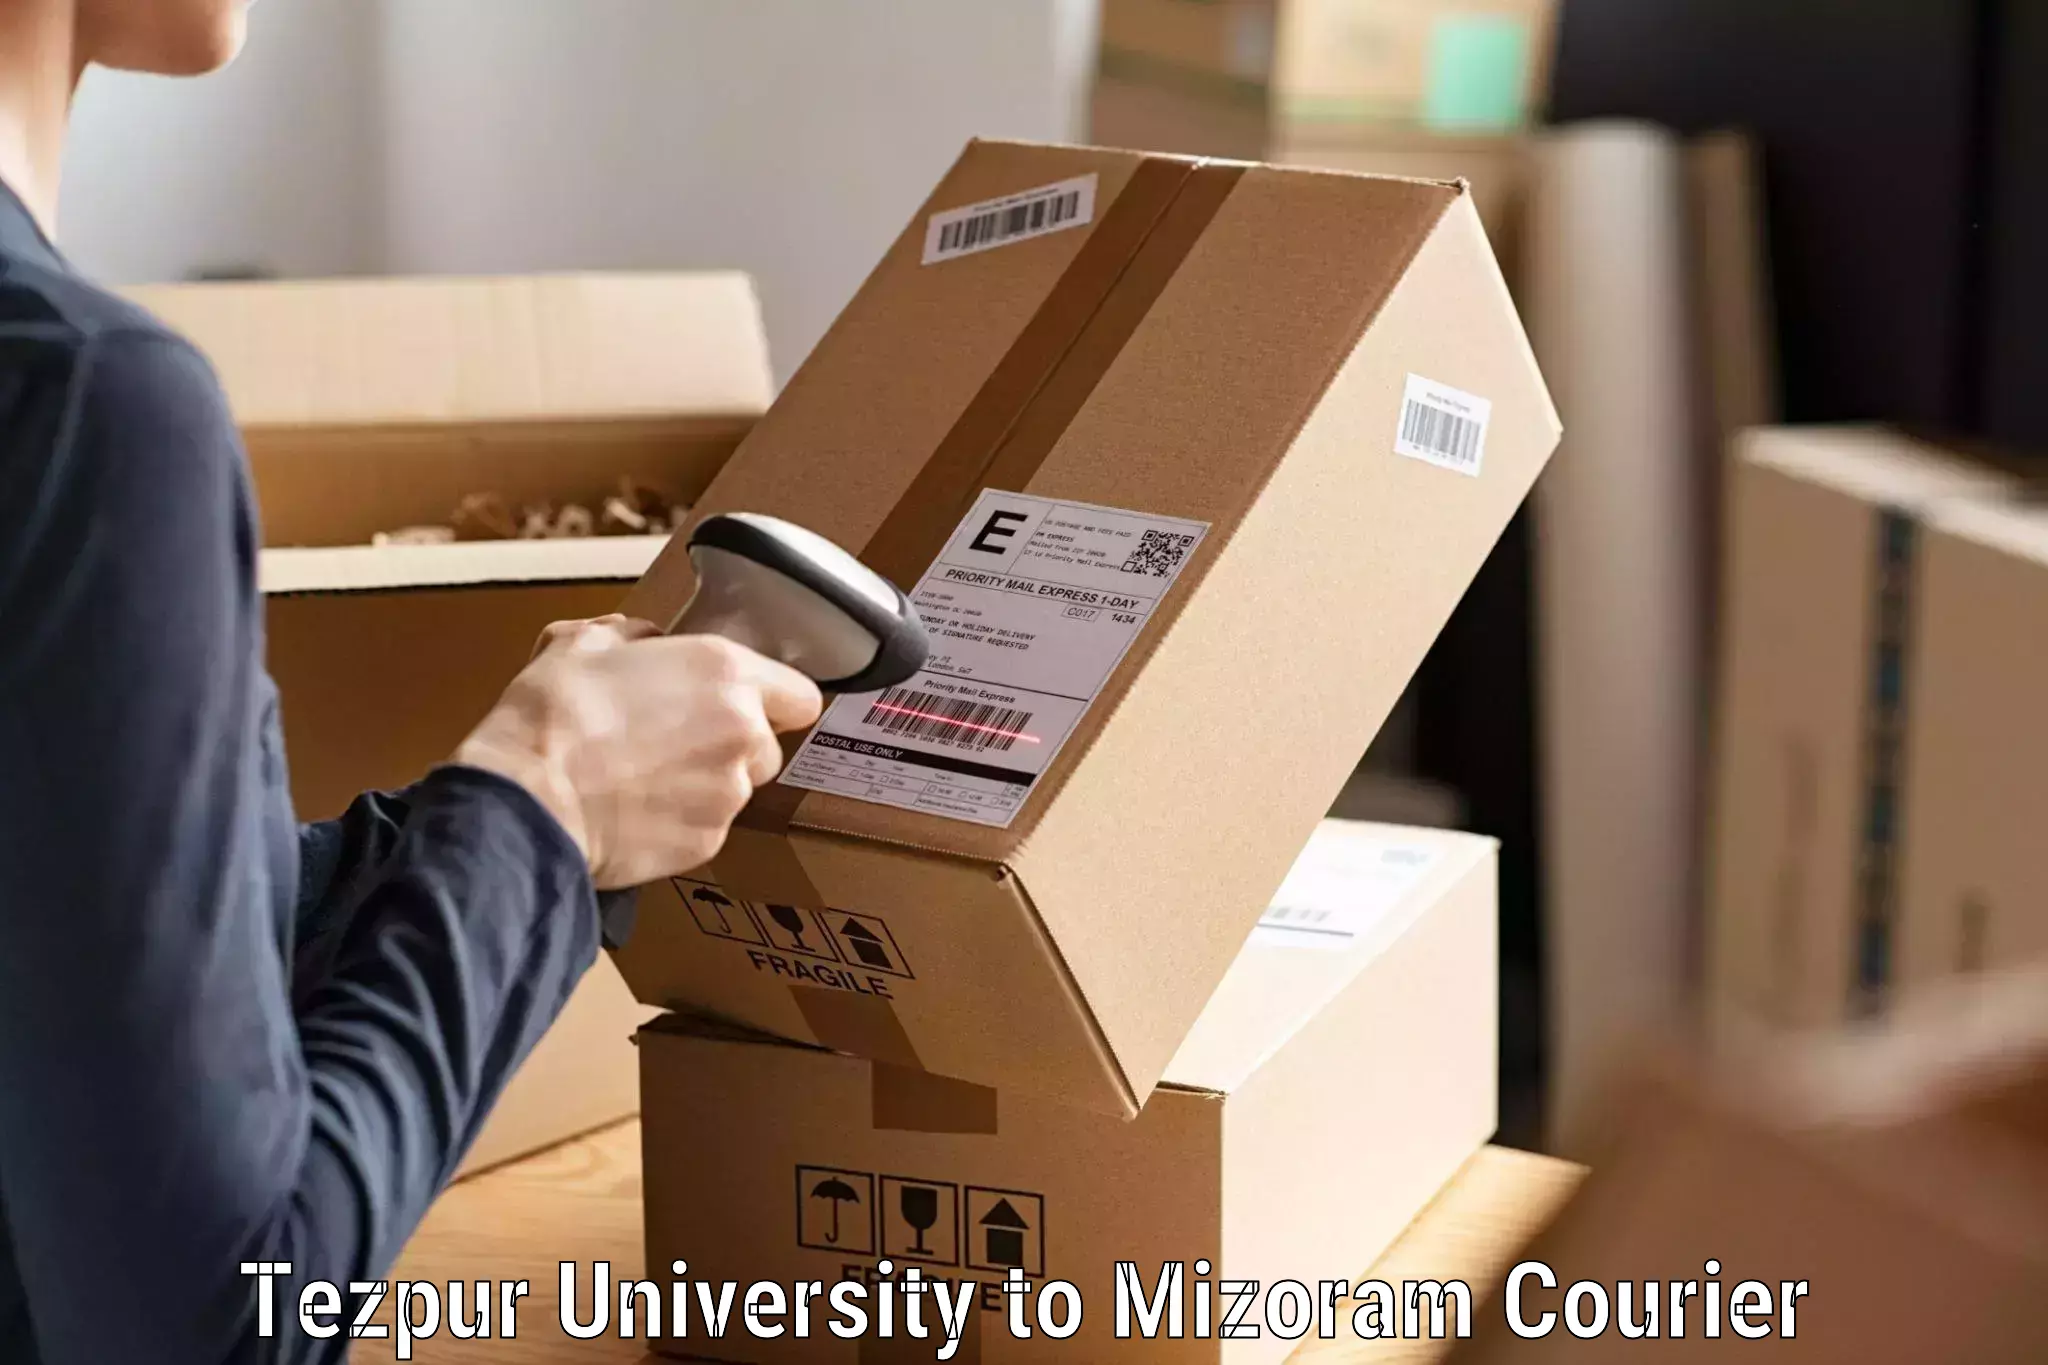 Large package courier Tezpur University to Lawngtlai